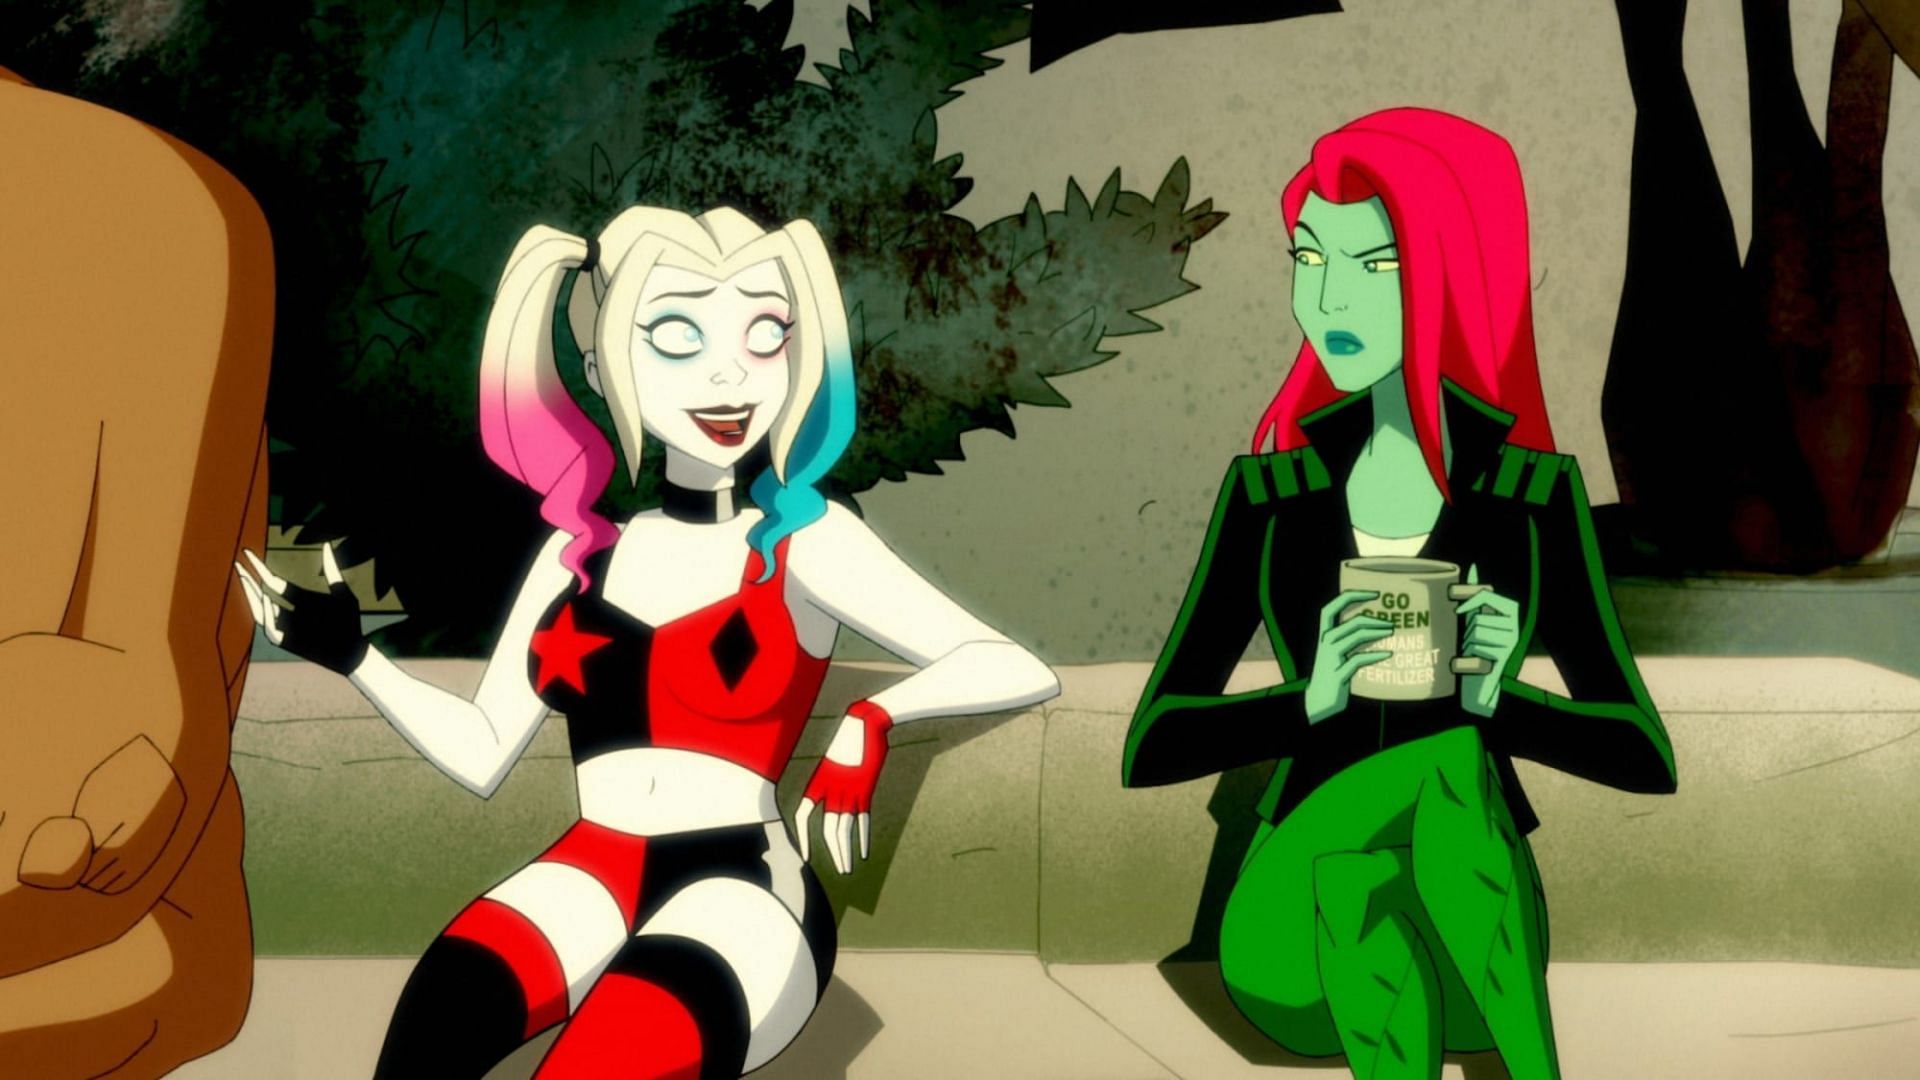 Fans speculate about the appearance of Poison Ivy in Joker 2 - will the green-skinned villainess make an appearance? (Image via DC Animation)